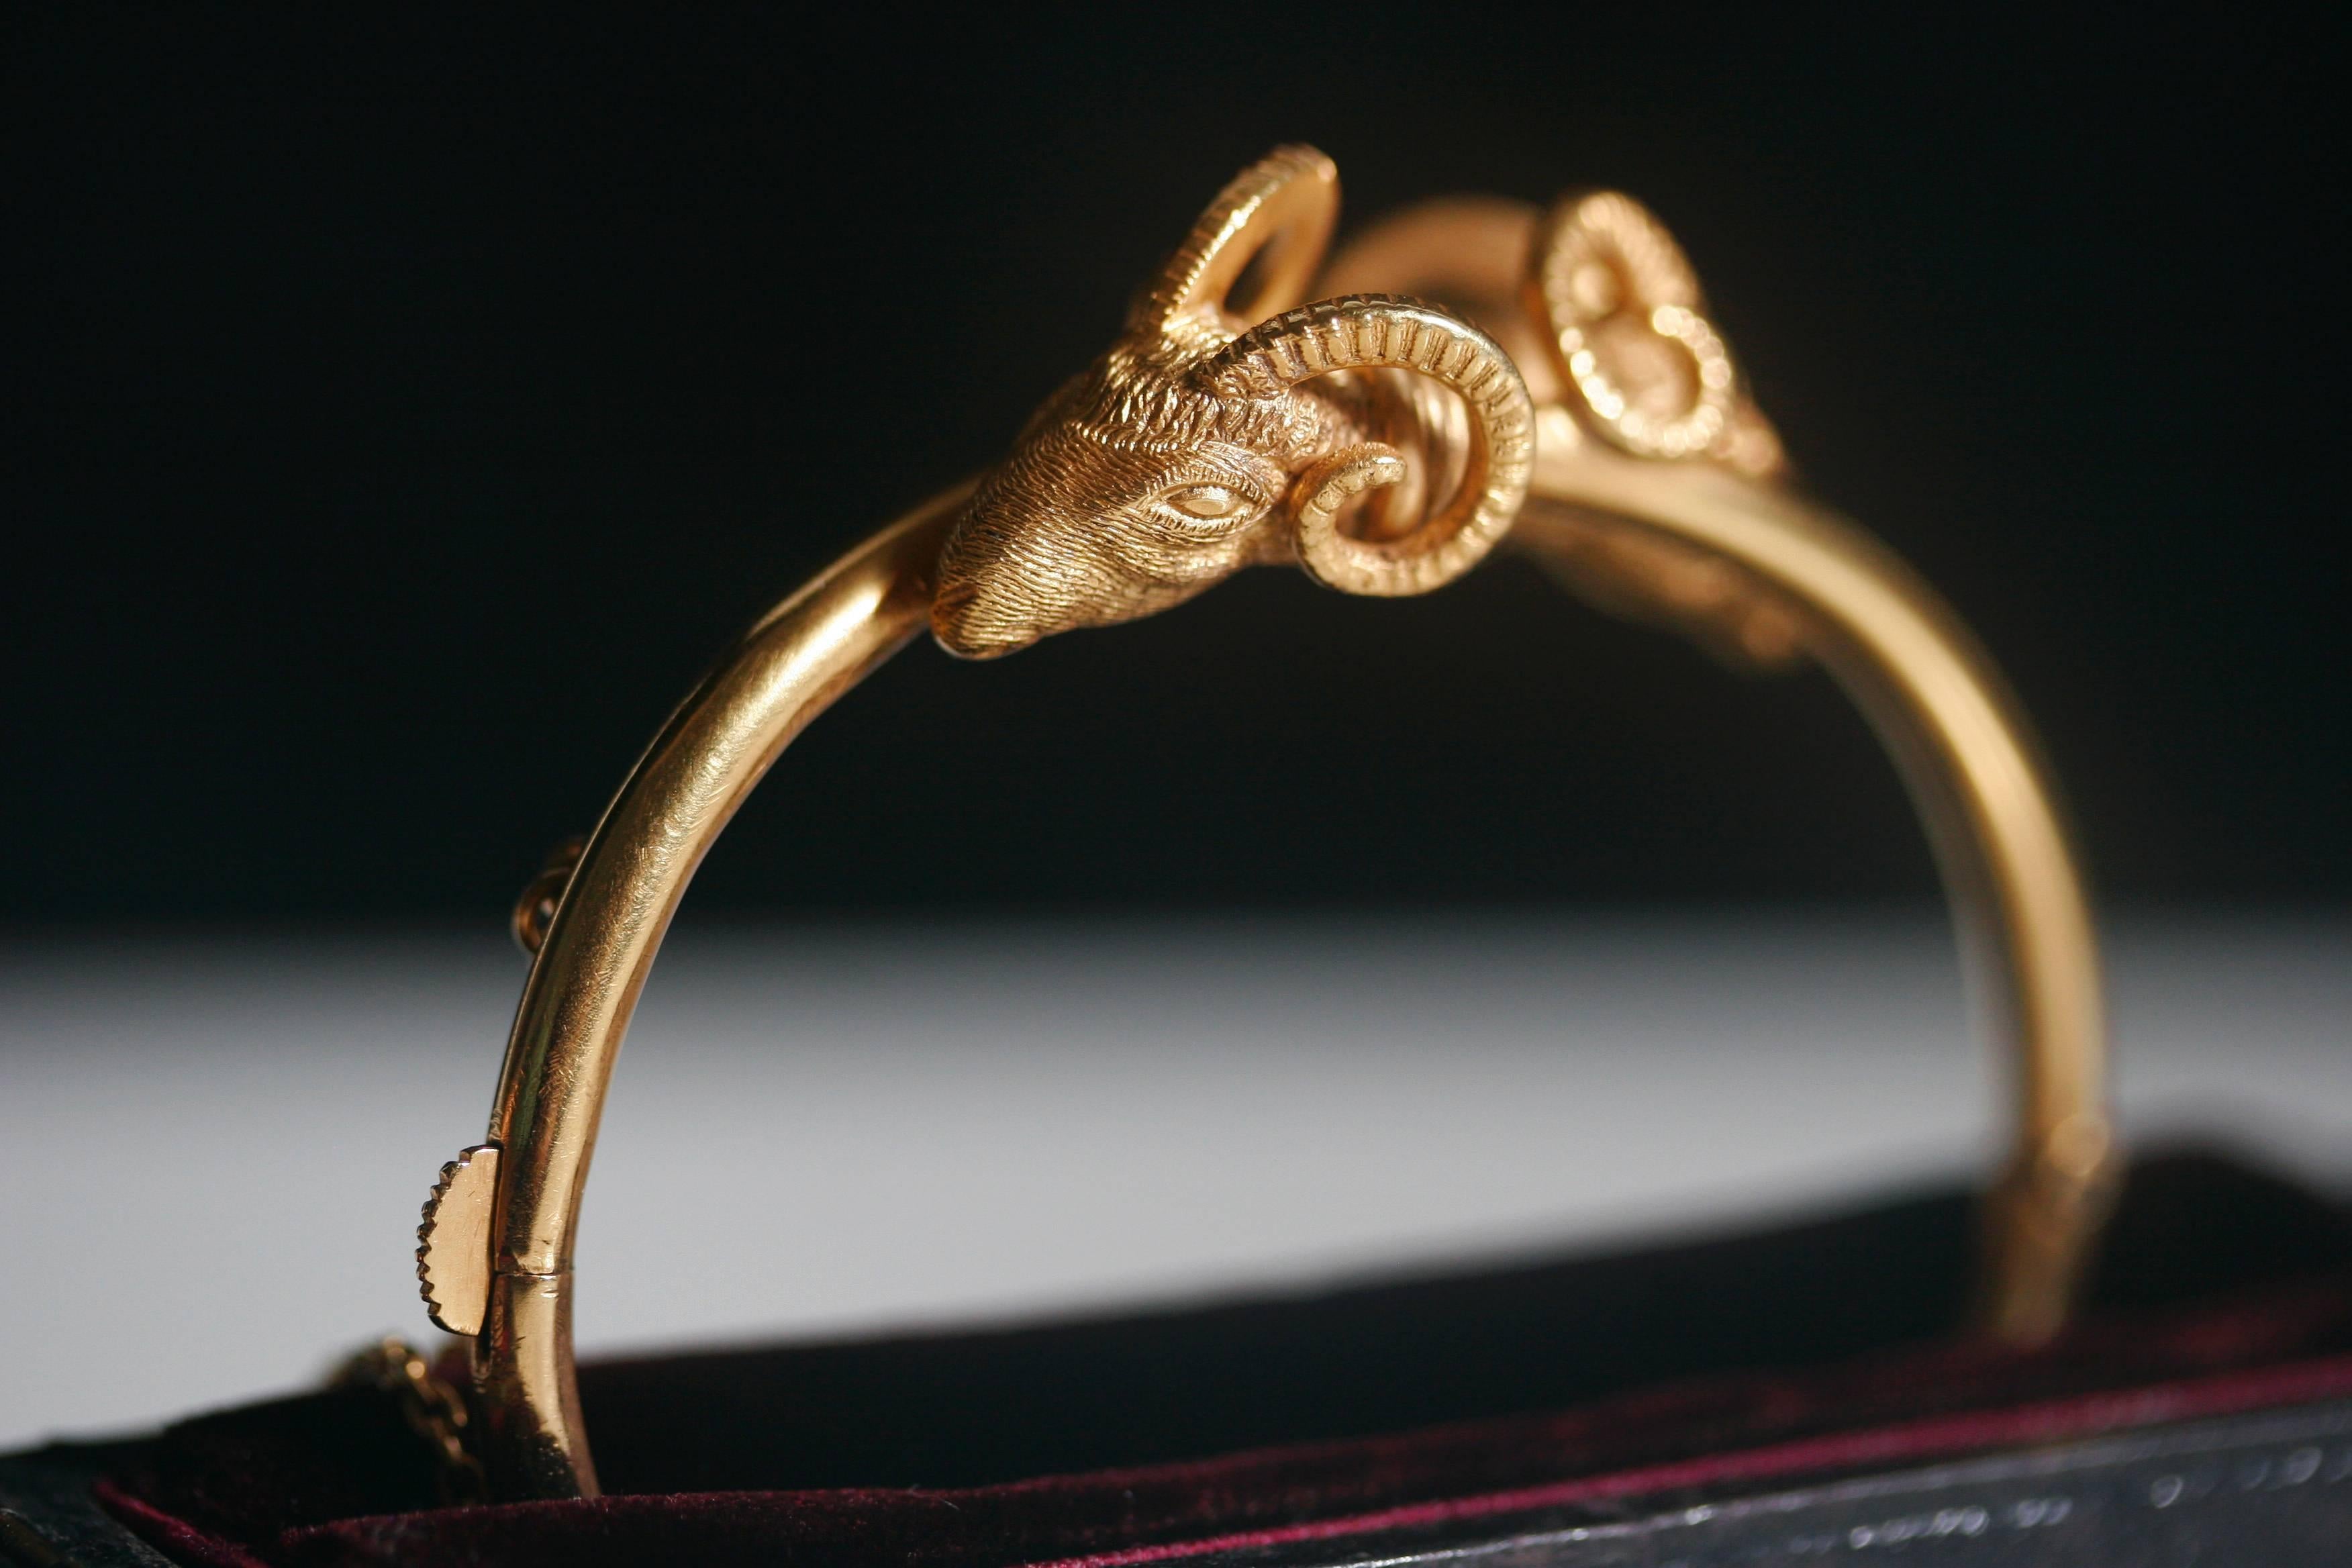 A spectacular cross over Aries’ heads Victorian gold bangle. The details of Aries’ /rams heads are exquisite. The bangle is 14k gold, and does include a security chain. The clasp is strong and secure. Inner circumference measures about 5.9 inches.